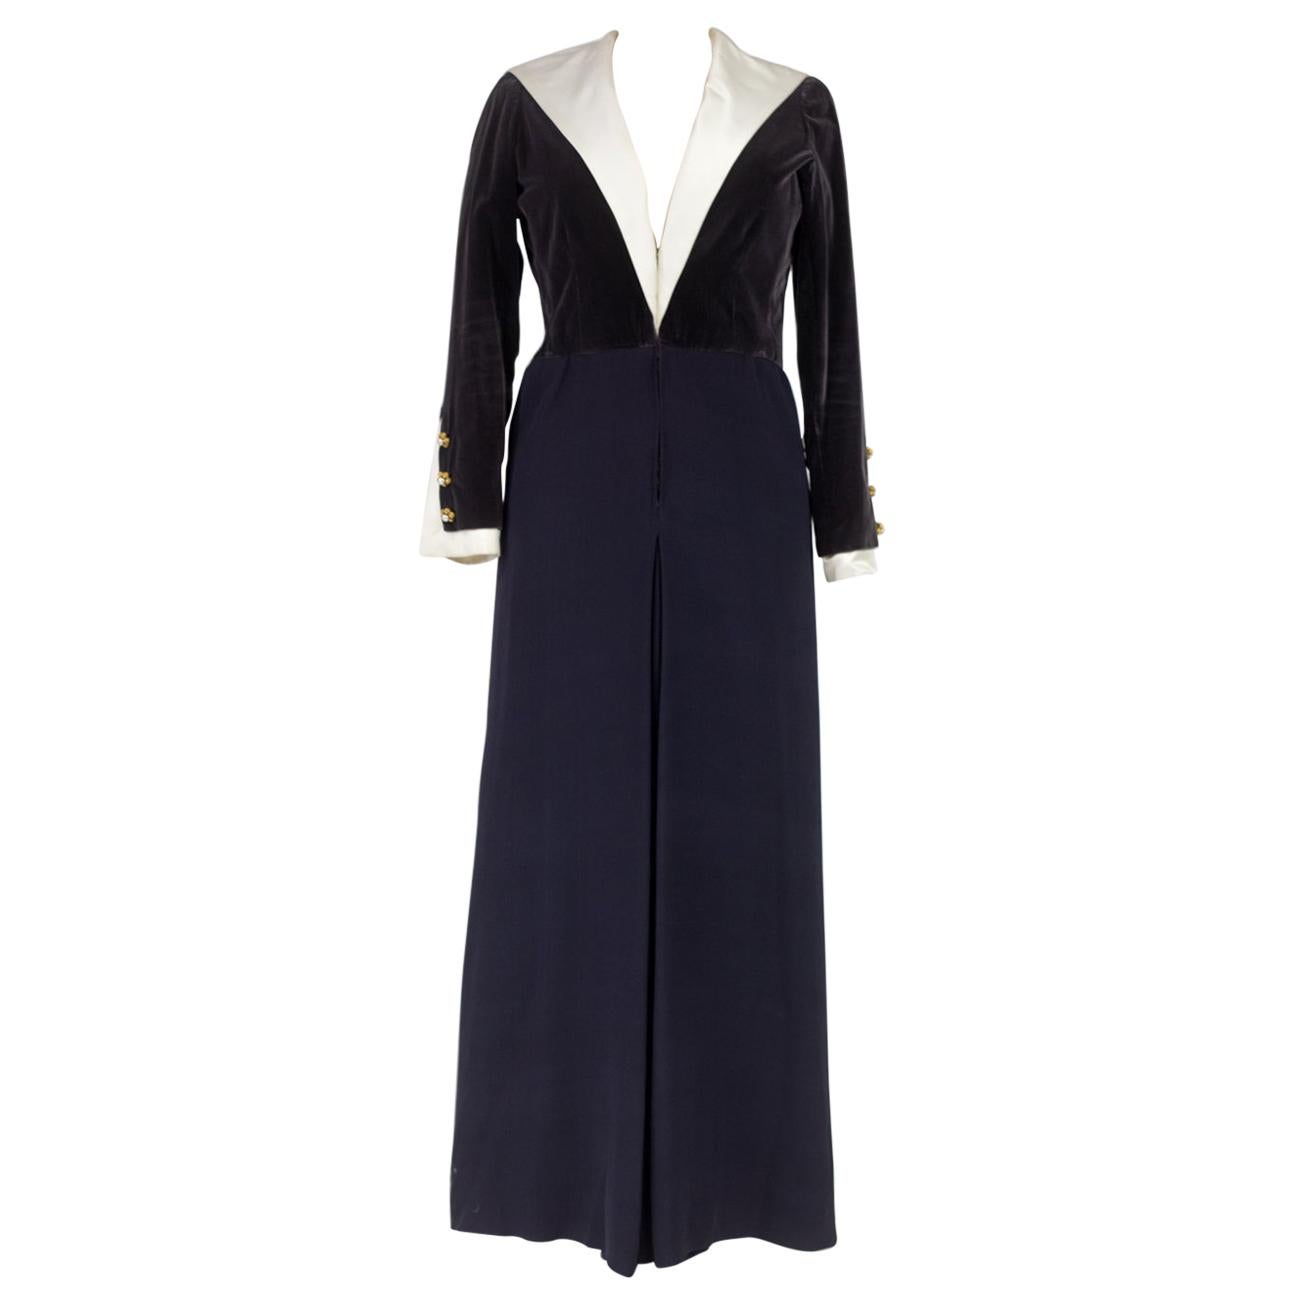 A Gabrielle Chanel Haute Couture Evening Navy Dress Numbered 42506 Circa 1955